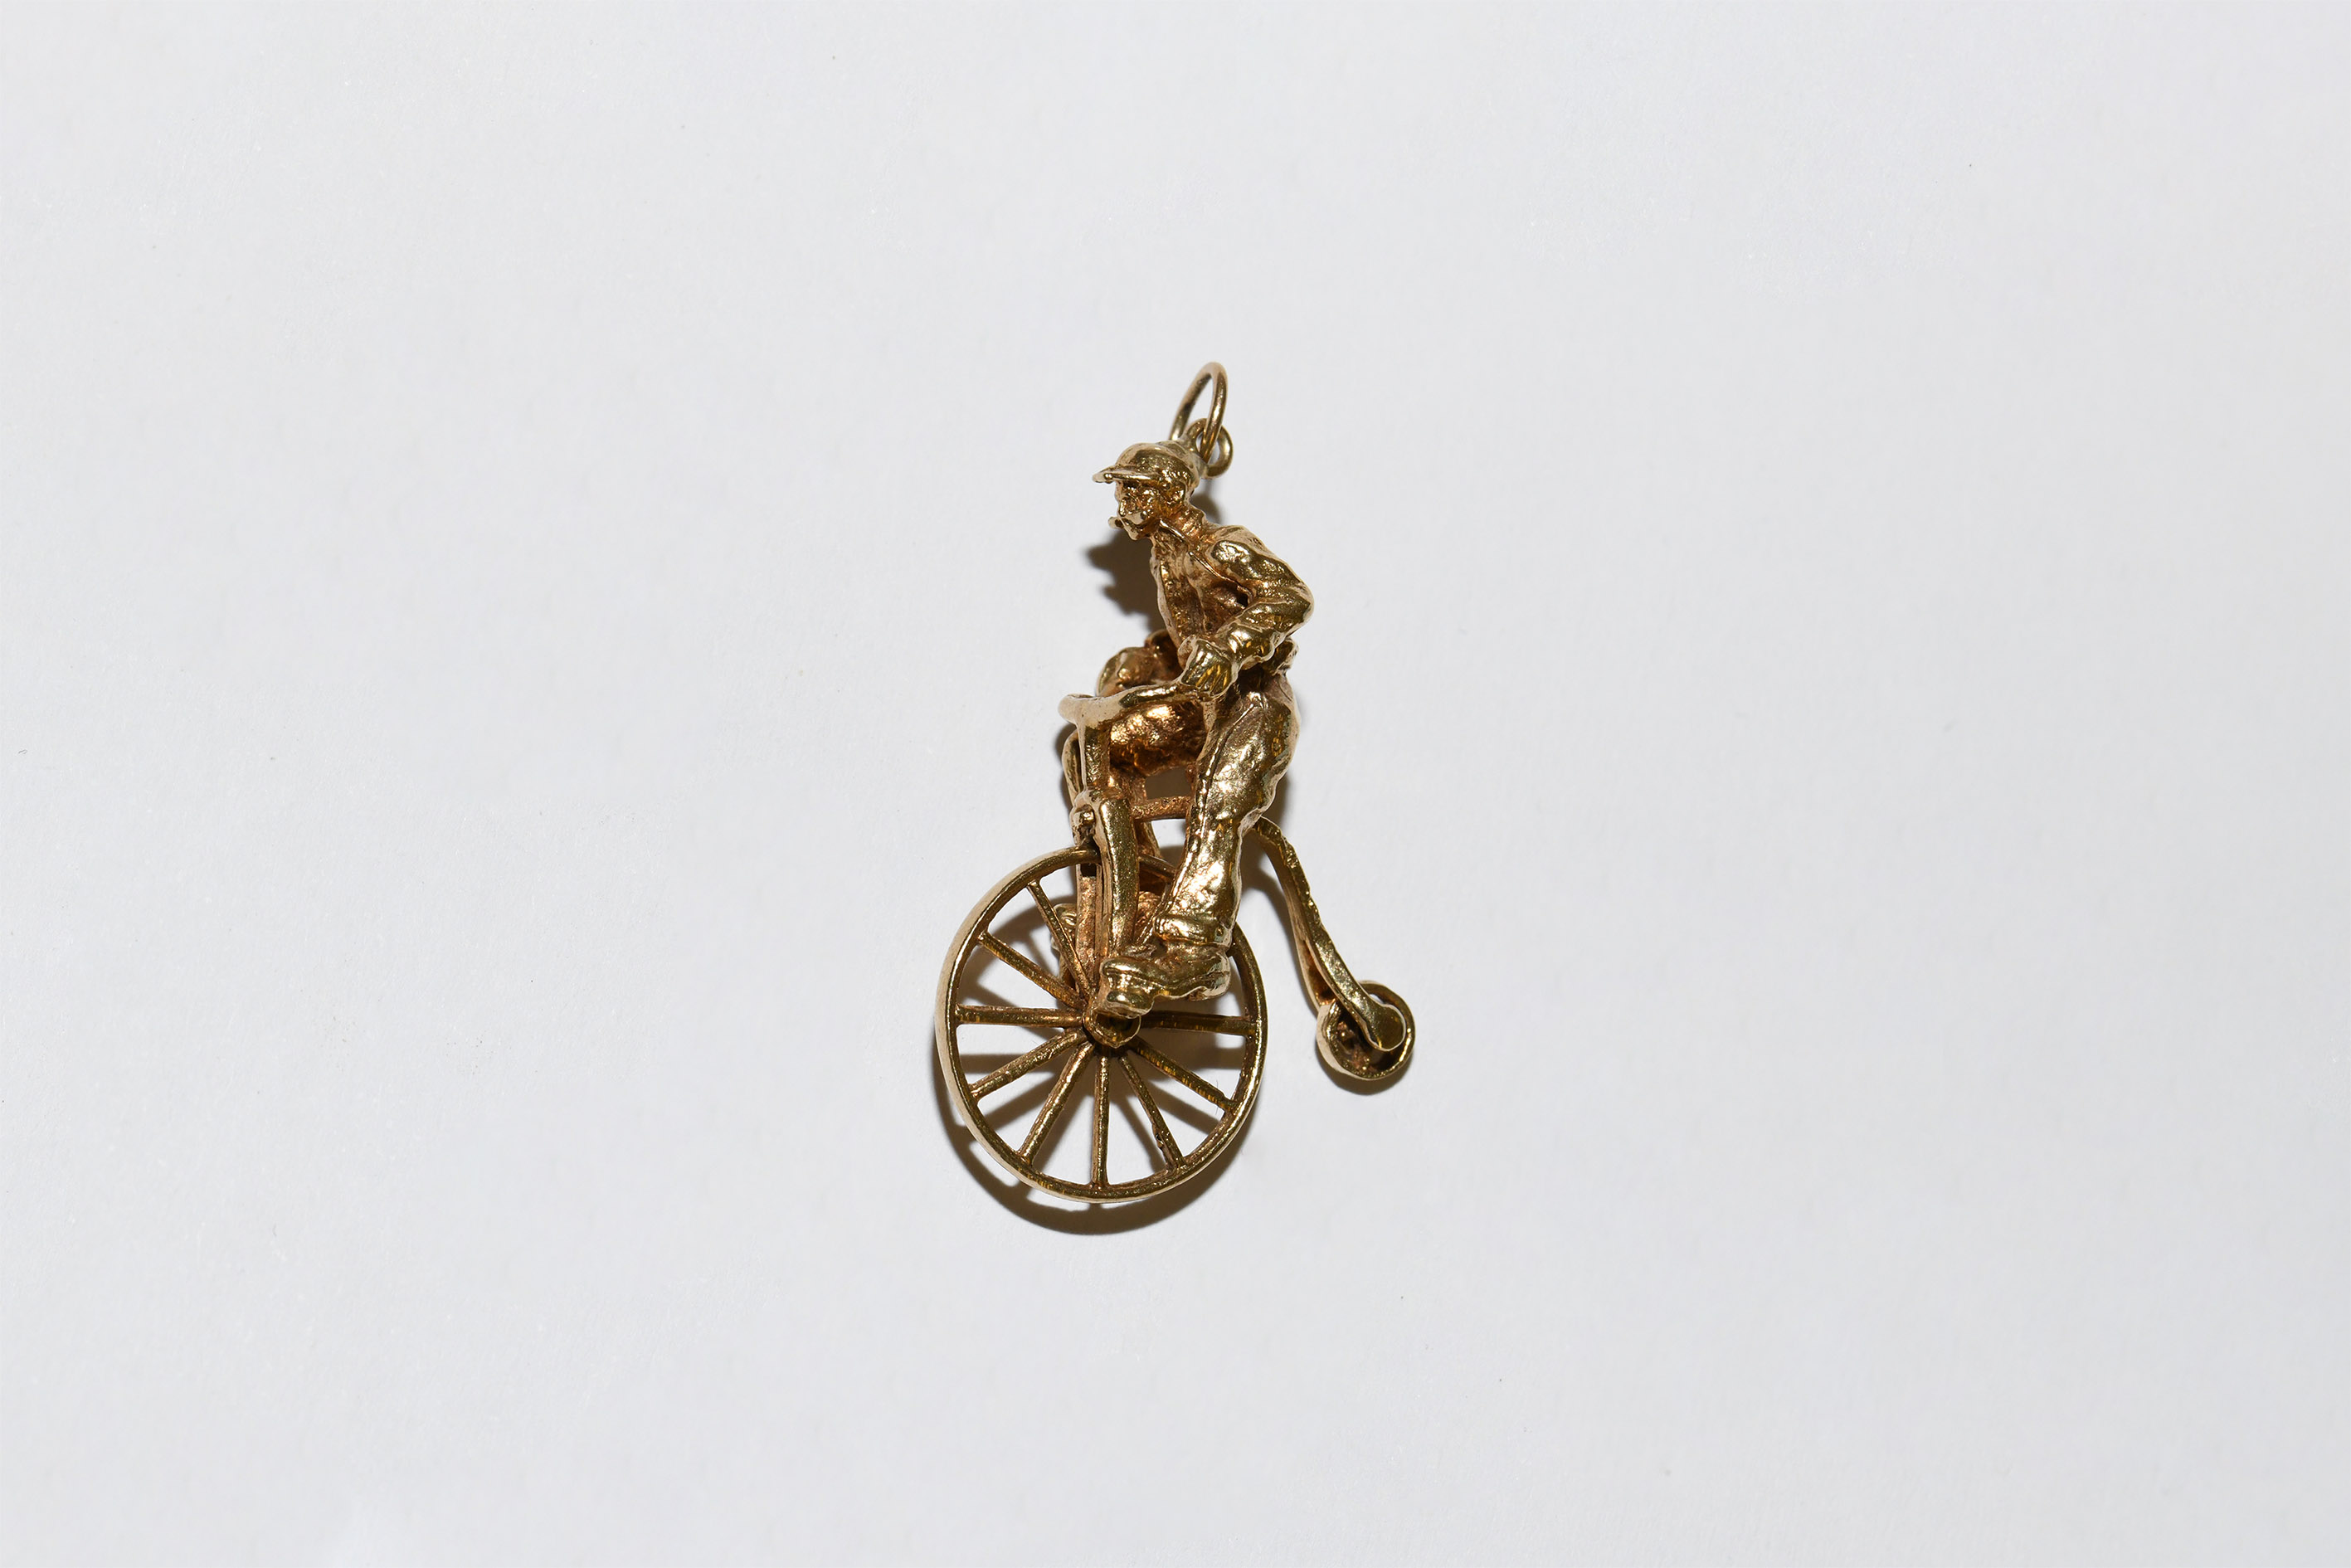 Vintage Gold Penny Farthing Bicycle Charm Pendant